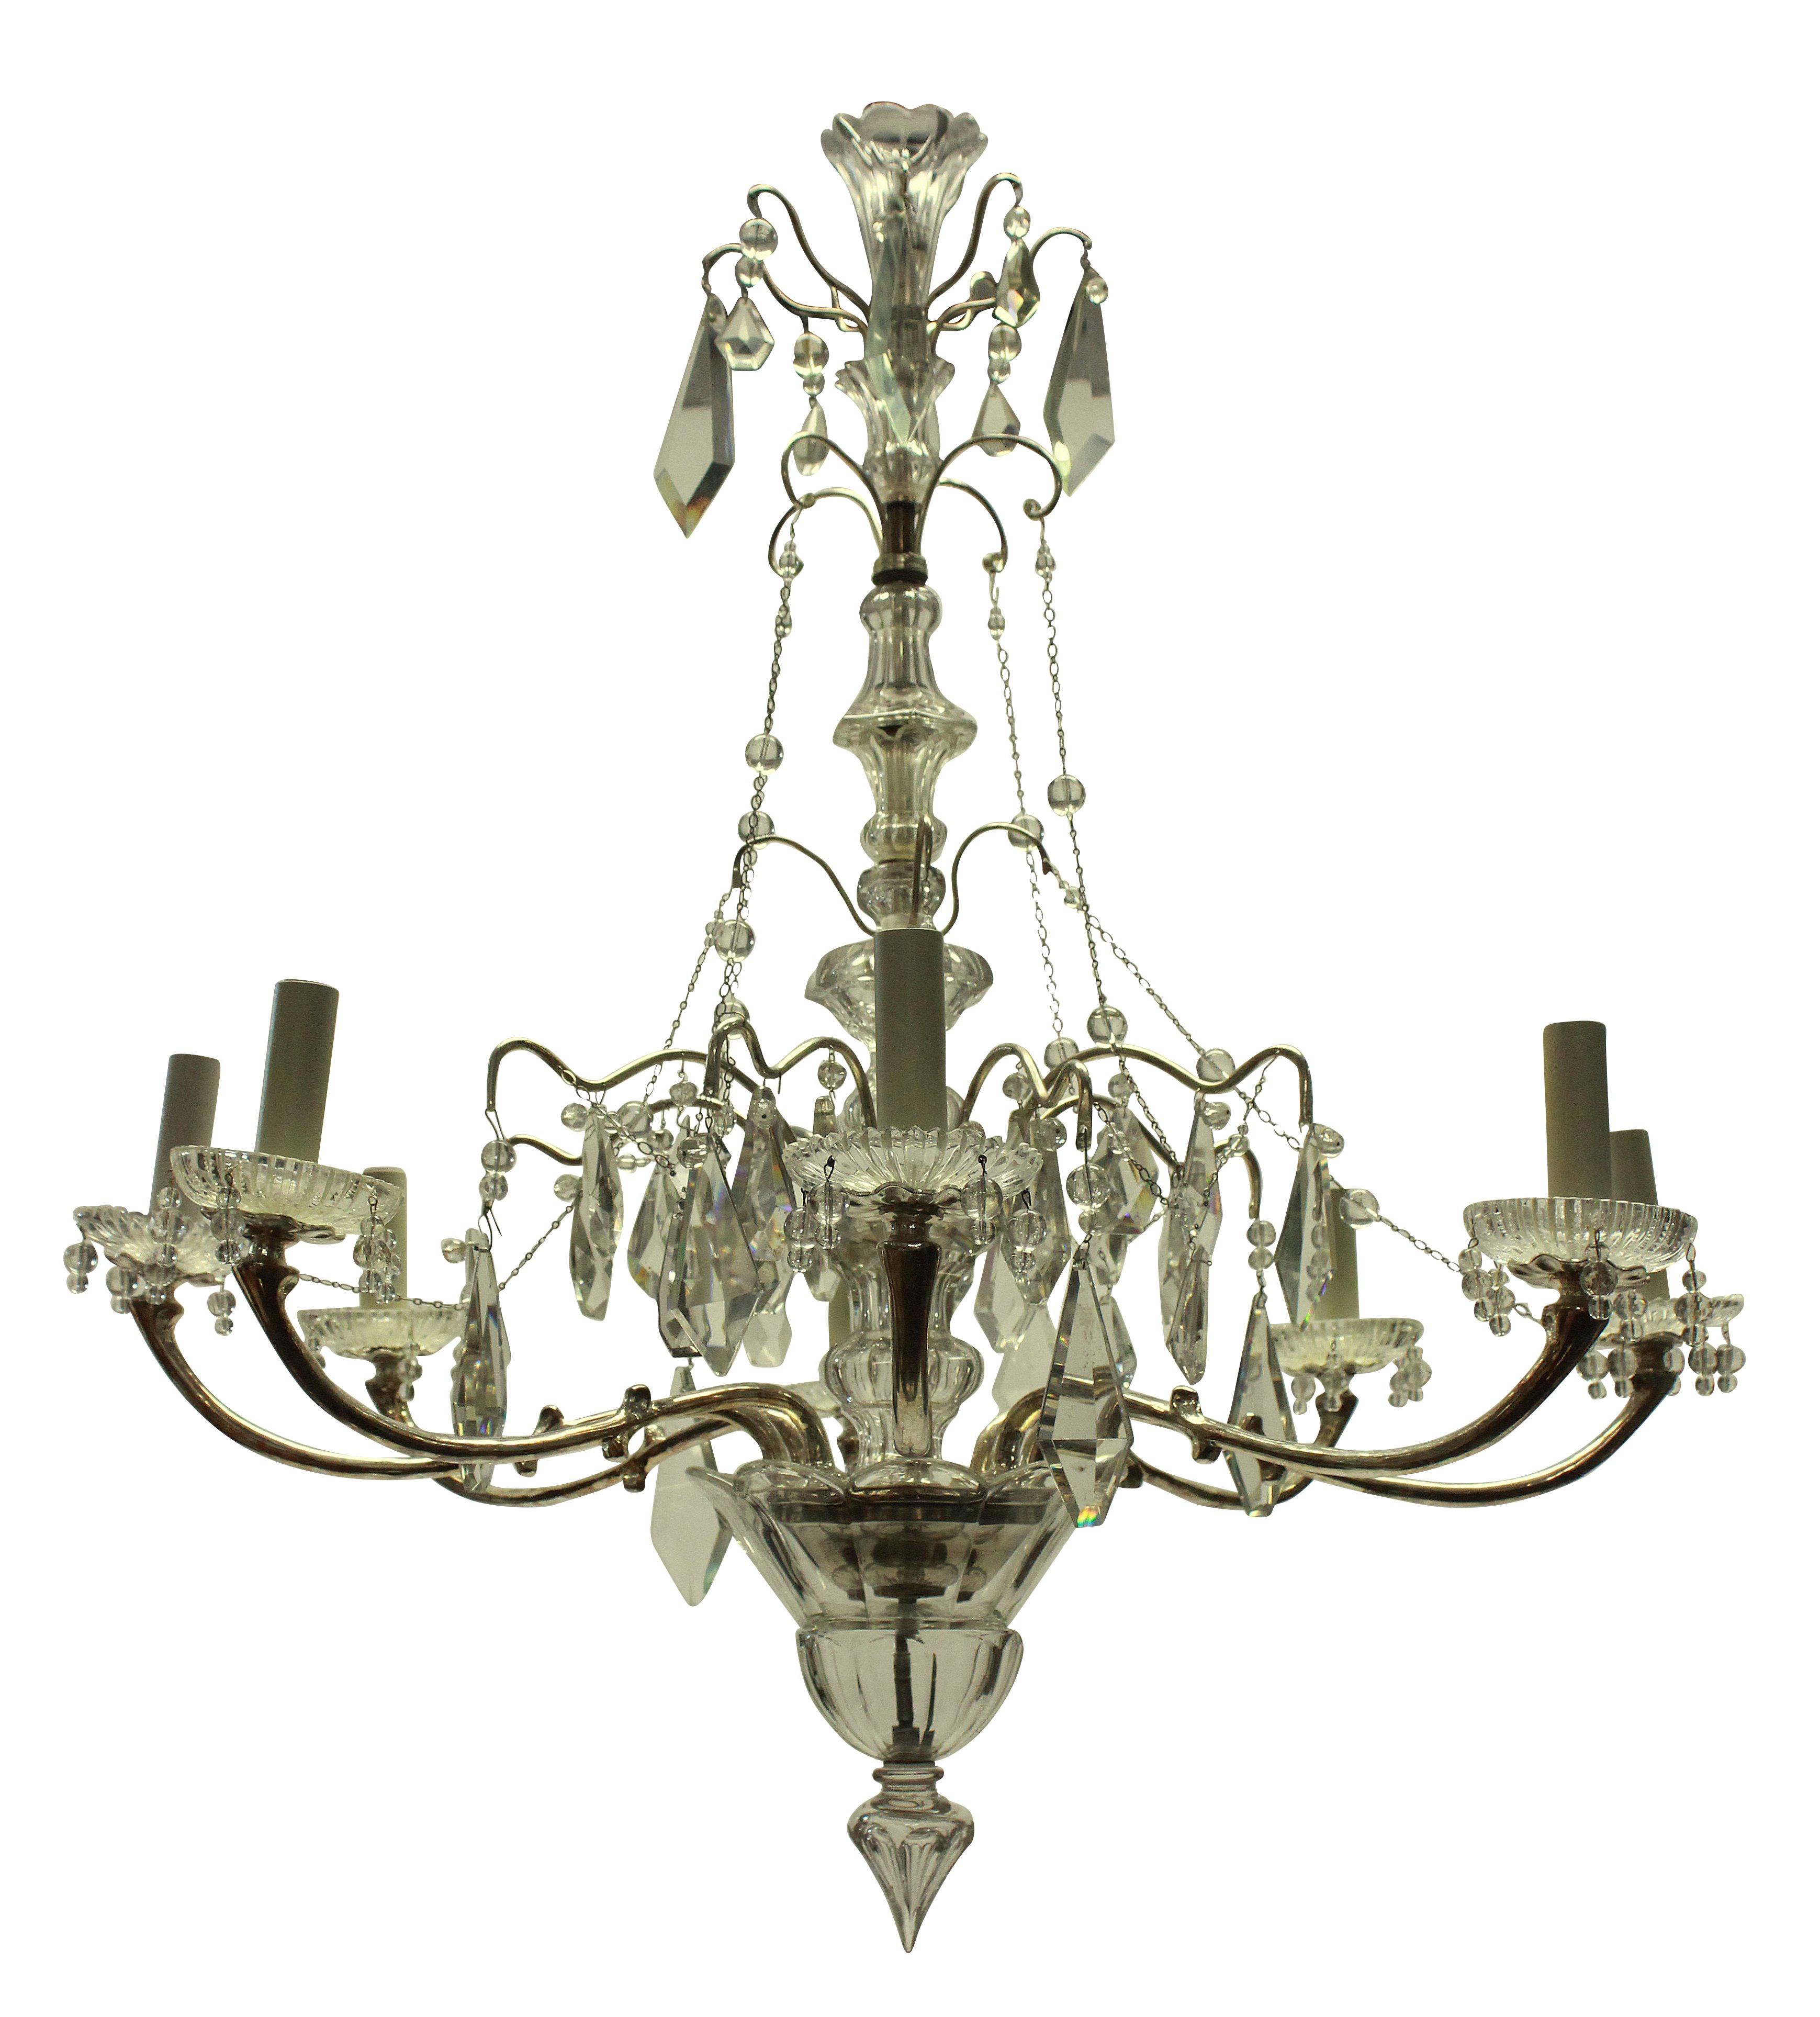 A French silver plated and cut glass chandelier of six arms. Hung throughout with finely cut plaques, chains and beads, with a crisply cut central baluster stem and finial.